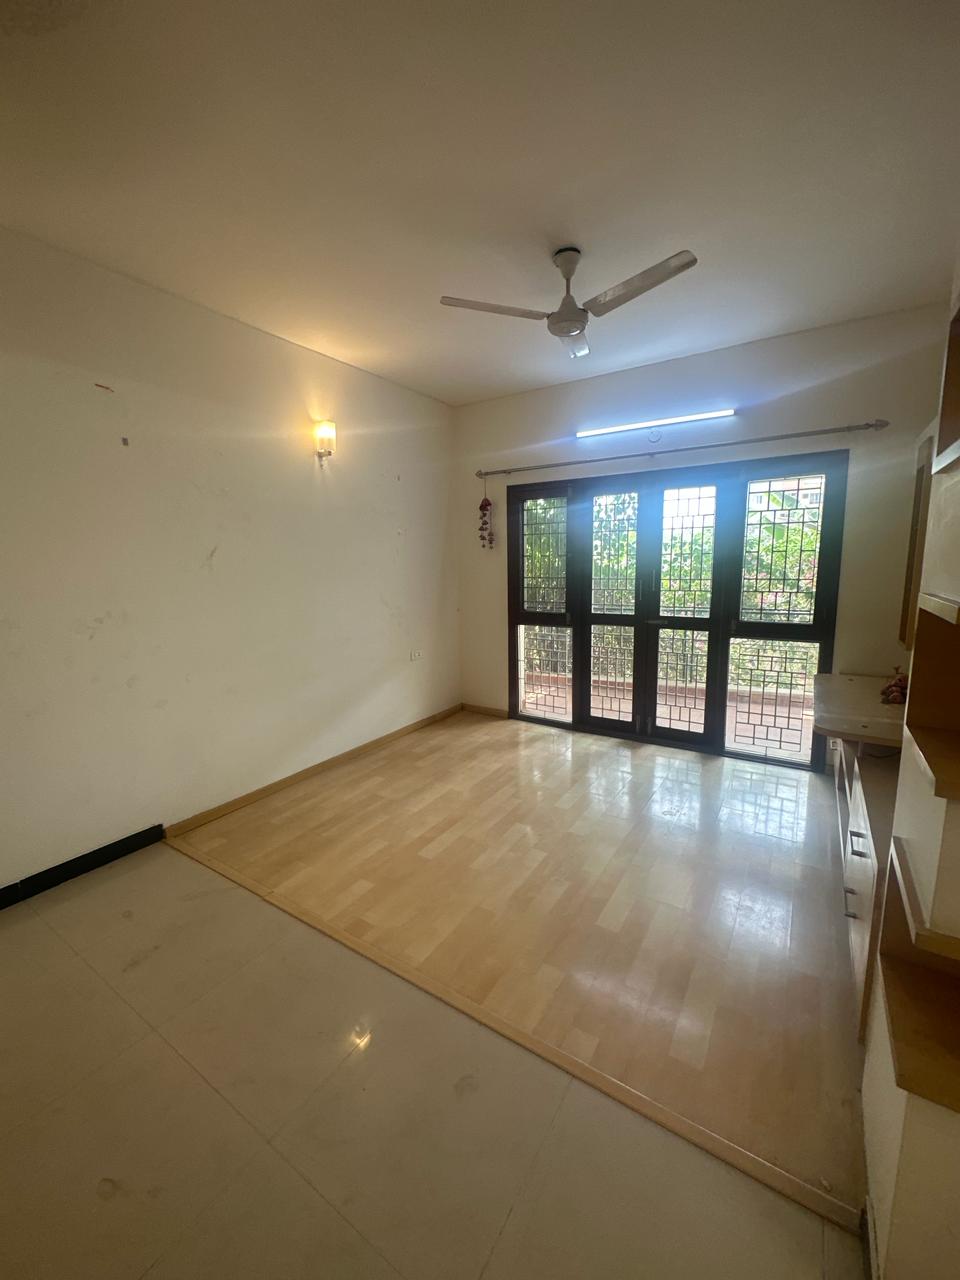 2 BHK Residential Apartment for Lease Only at JAM-6845 in Domlur